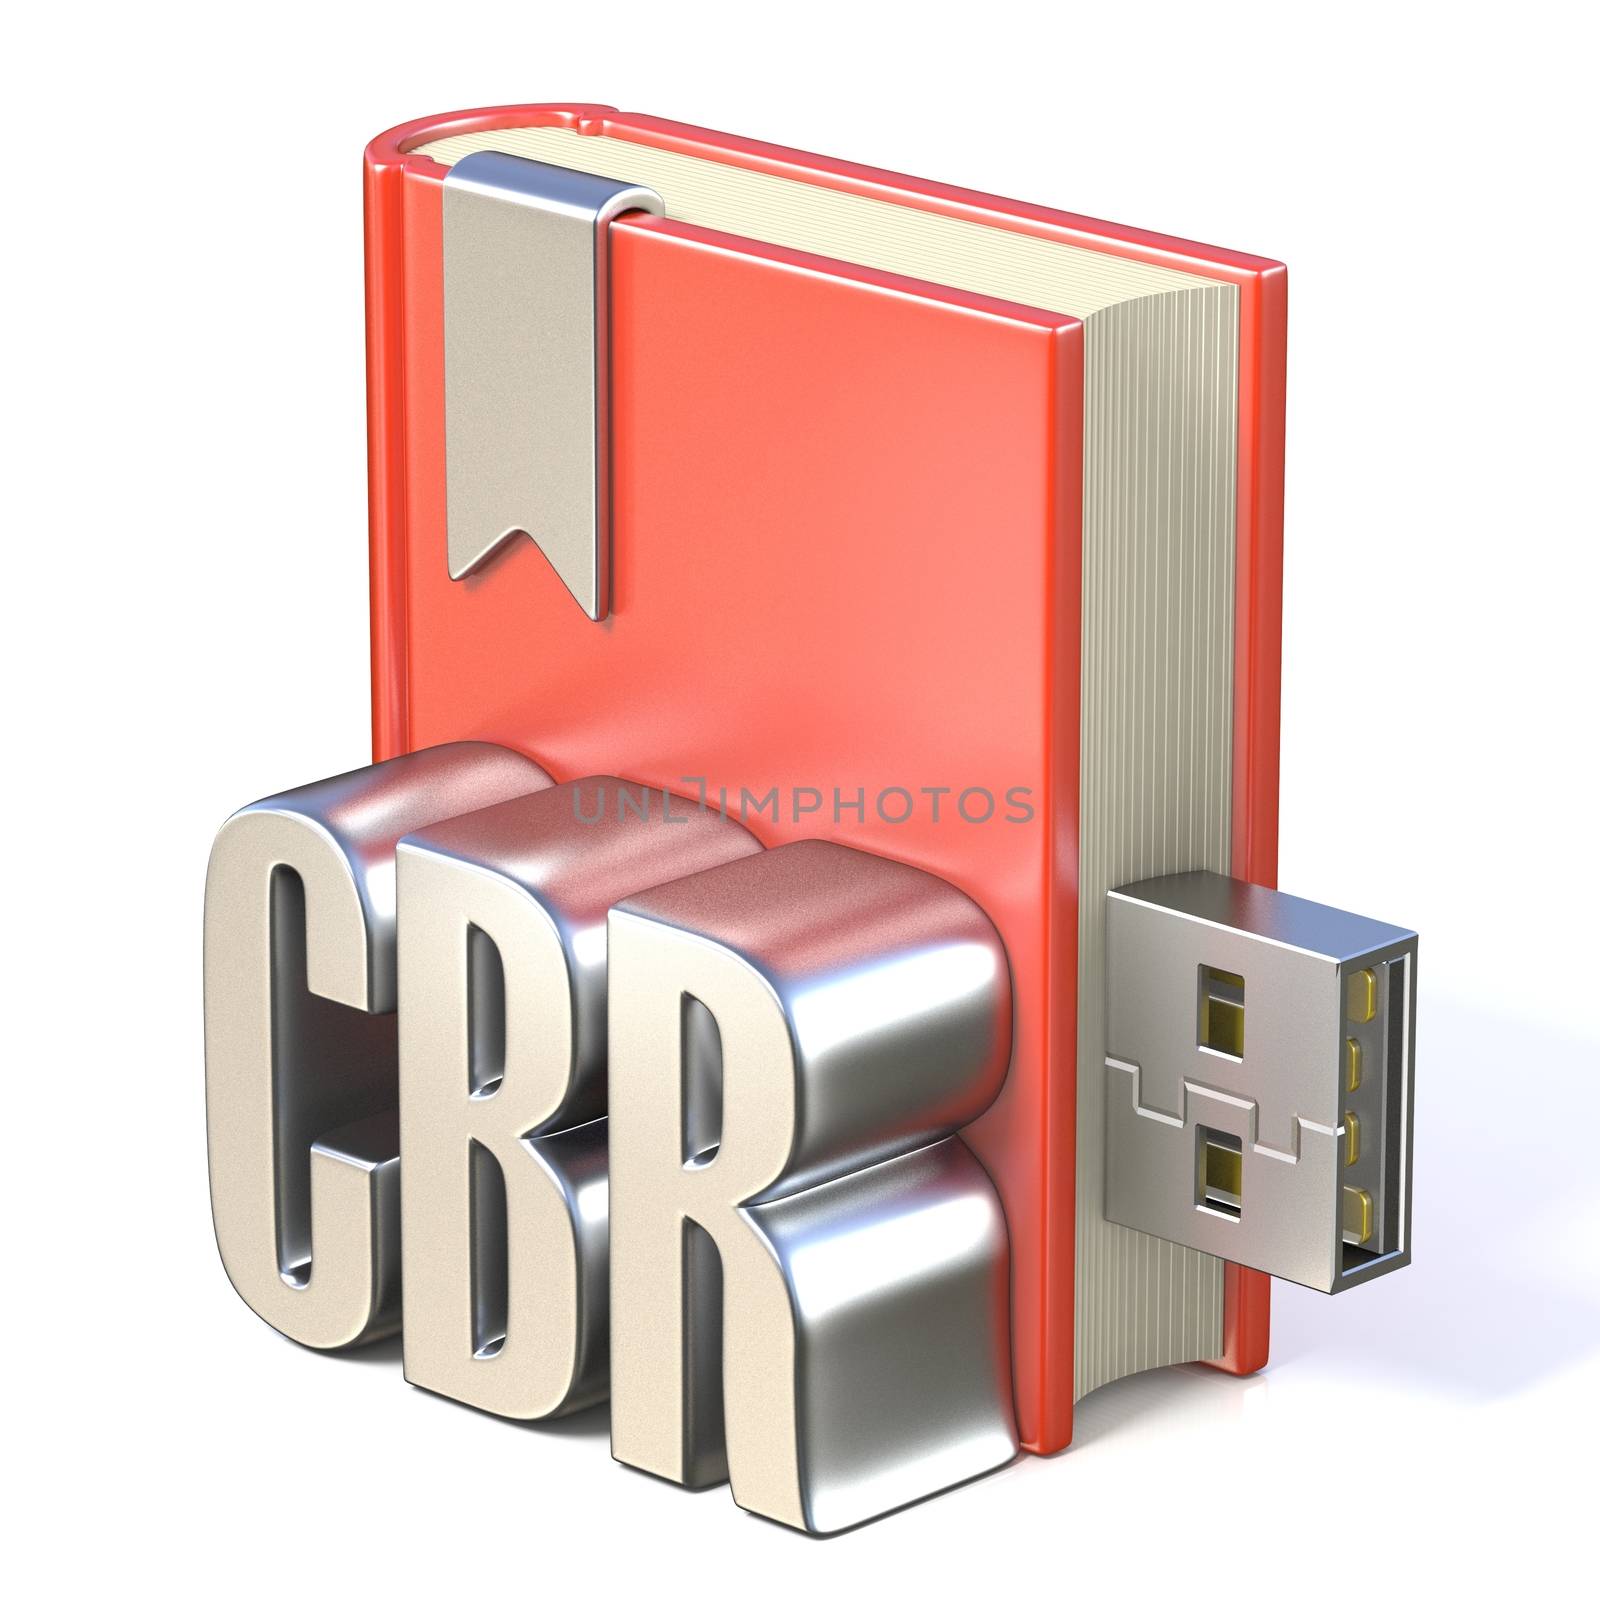 eBook icon metal CBR red book USB 3D by djmilic